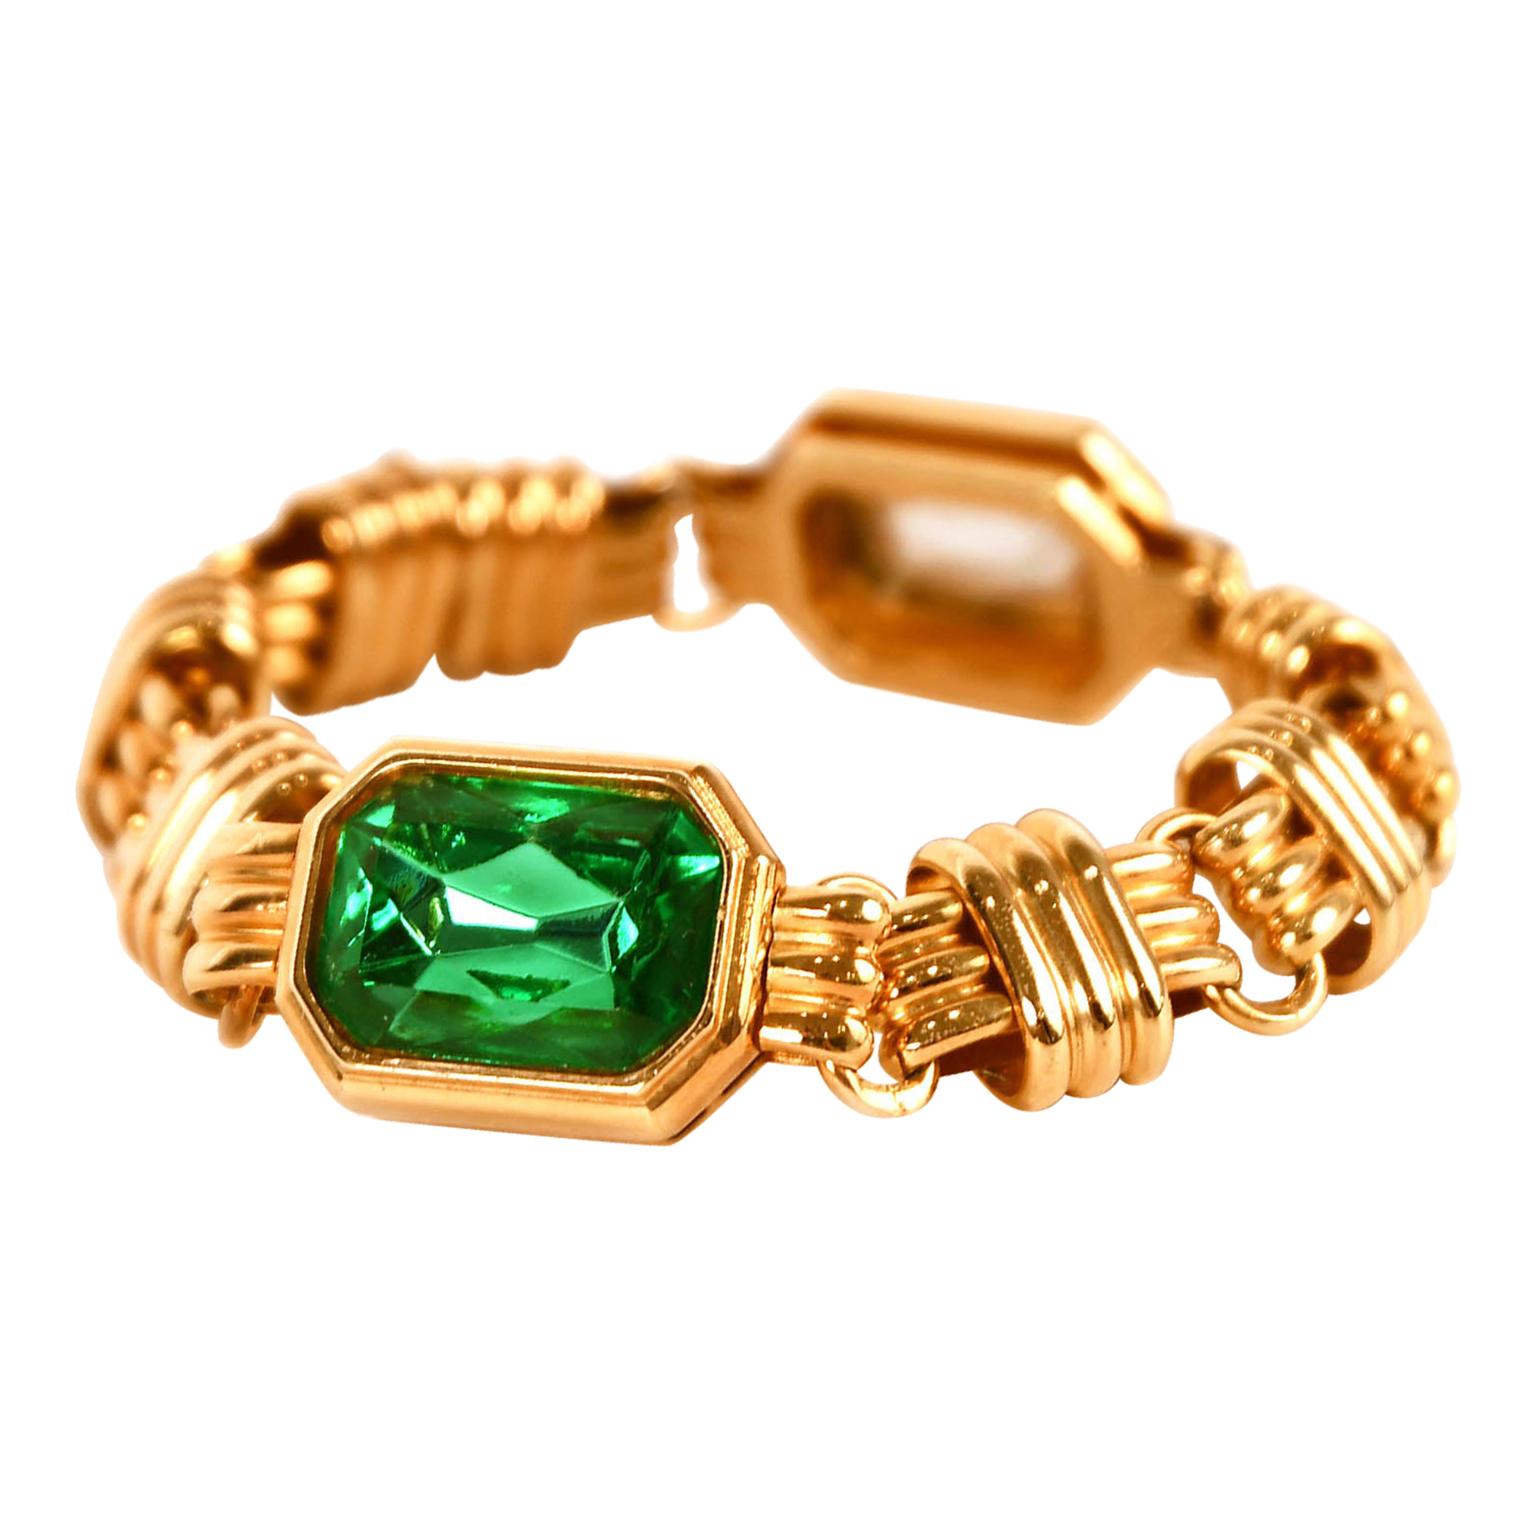 Traveller Bijoux Cascio 1970s Gold Plated Green Strass Gilted Bracelet, Italy